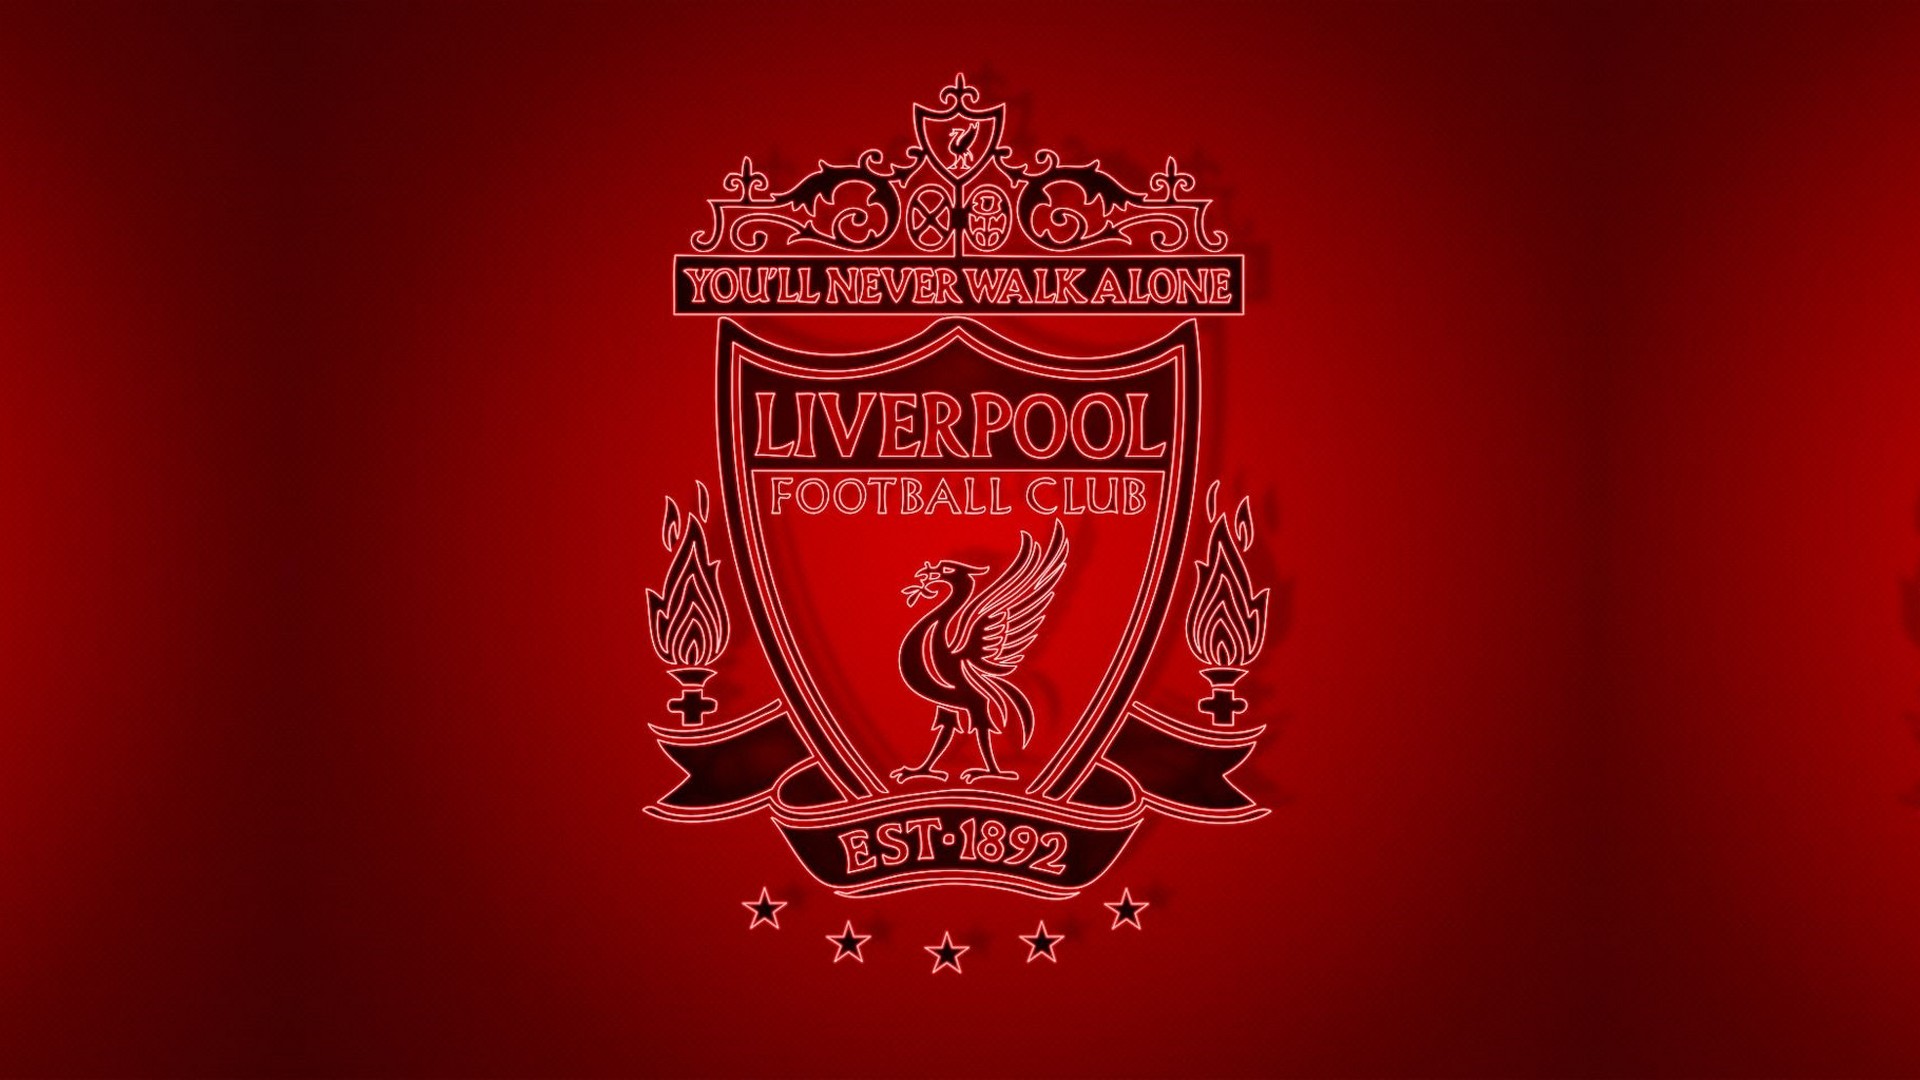 HD Backgrounds Liverpool With Resolution 1920X1080 pixel. You can make this wallpaper for your Mac or Windows Desktop Background, iPhone, Android or Tablet and another Smartphone device for free